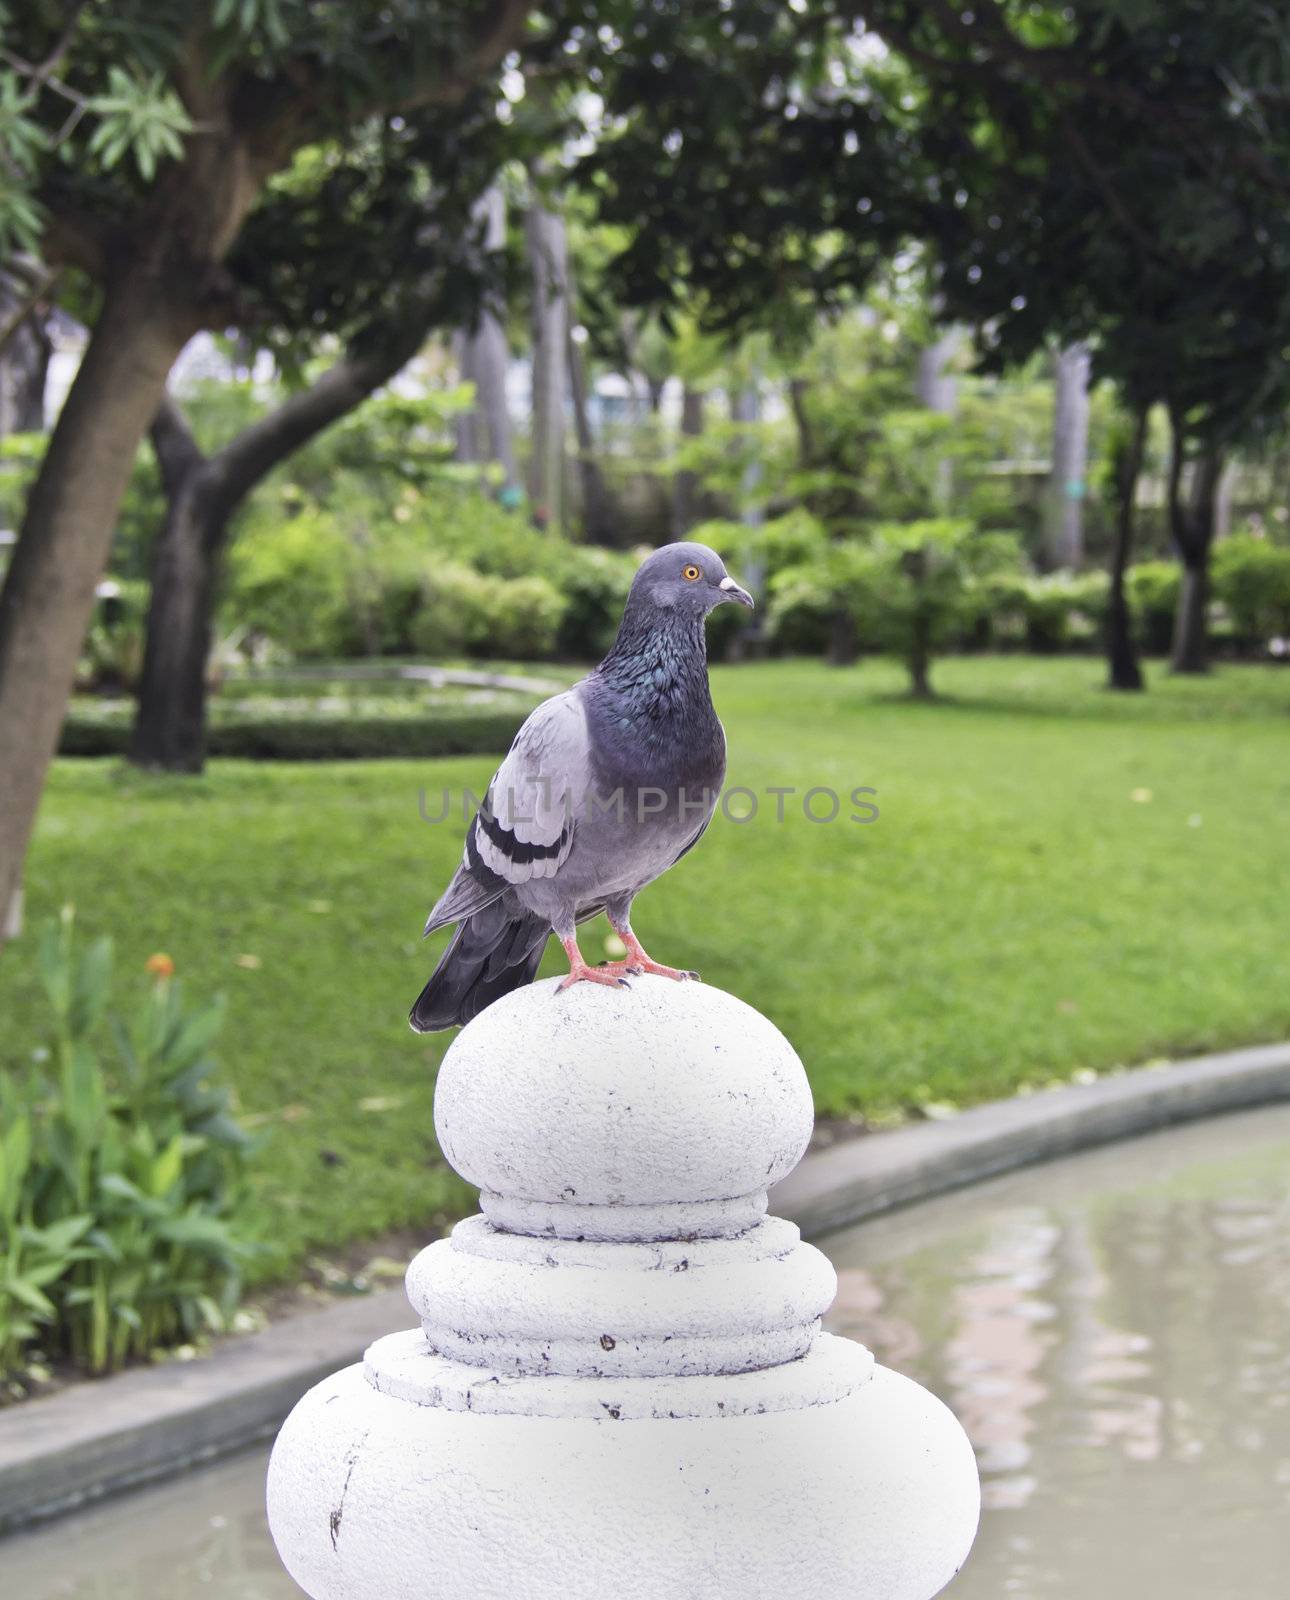 Grey city pigeon in park with nature